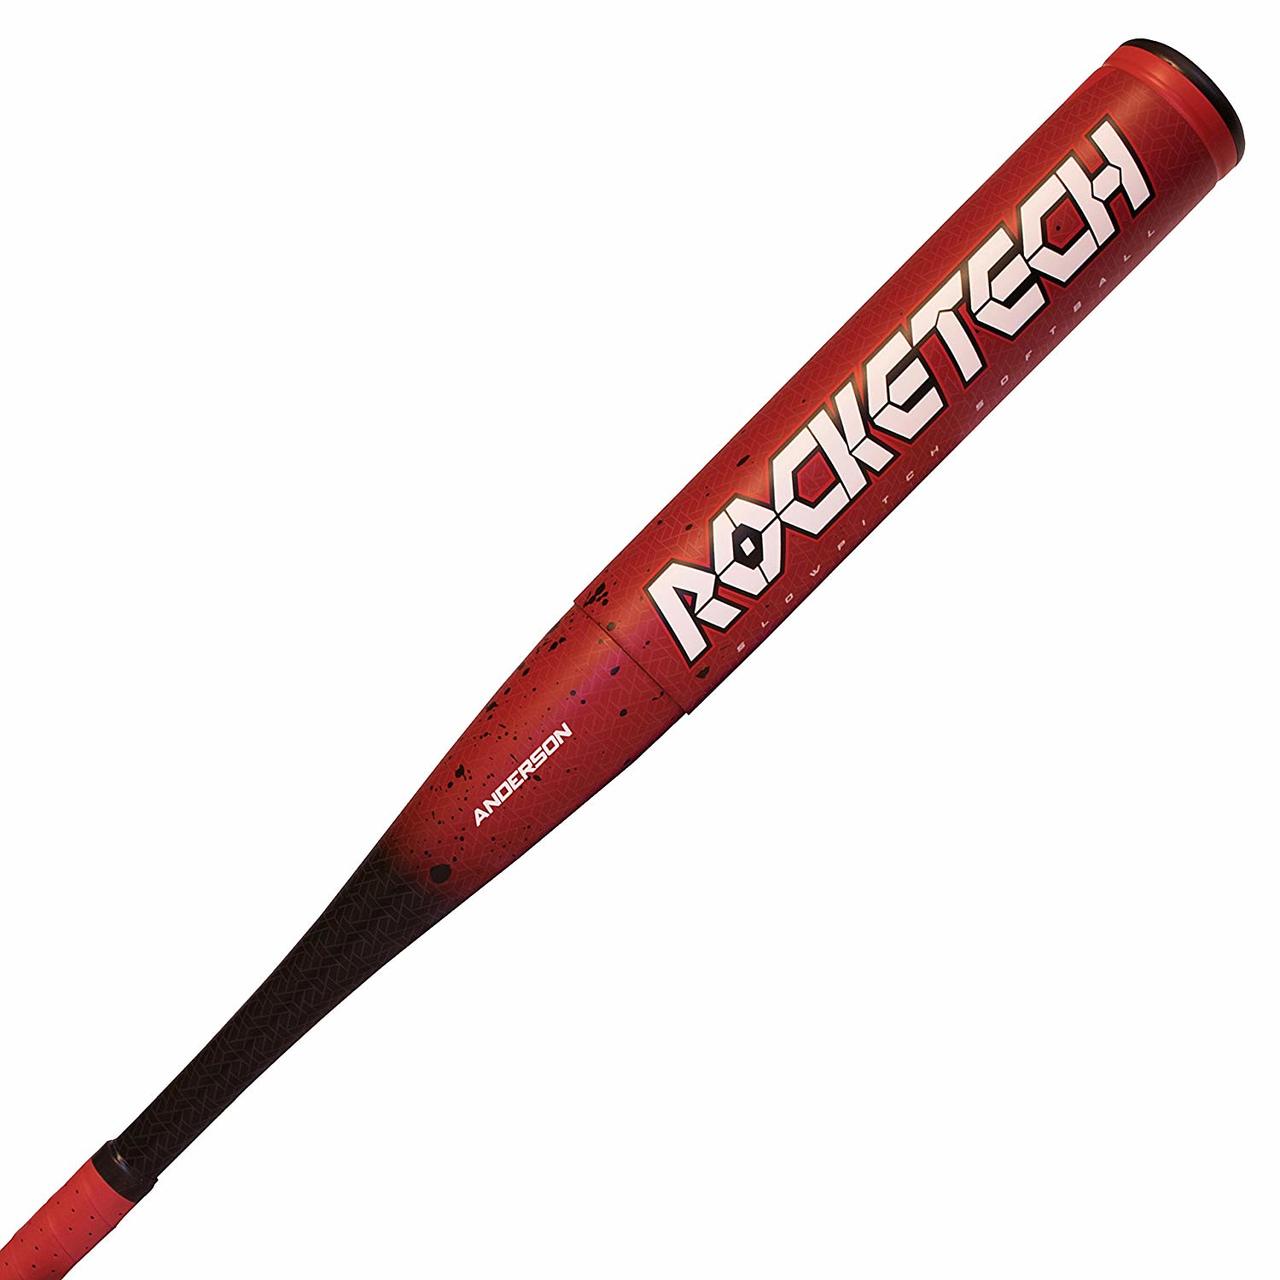 anderson-2018-rocketech-slowpitch-softball-bat-34-in-26-oz 044044-3426 Anderson 874147008584 2 ¼” Barrel Ultra-Thin whip handle for better bat speed End